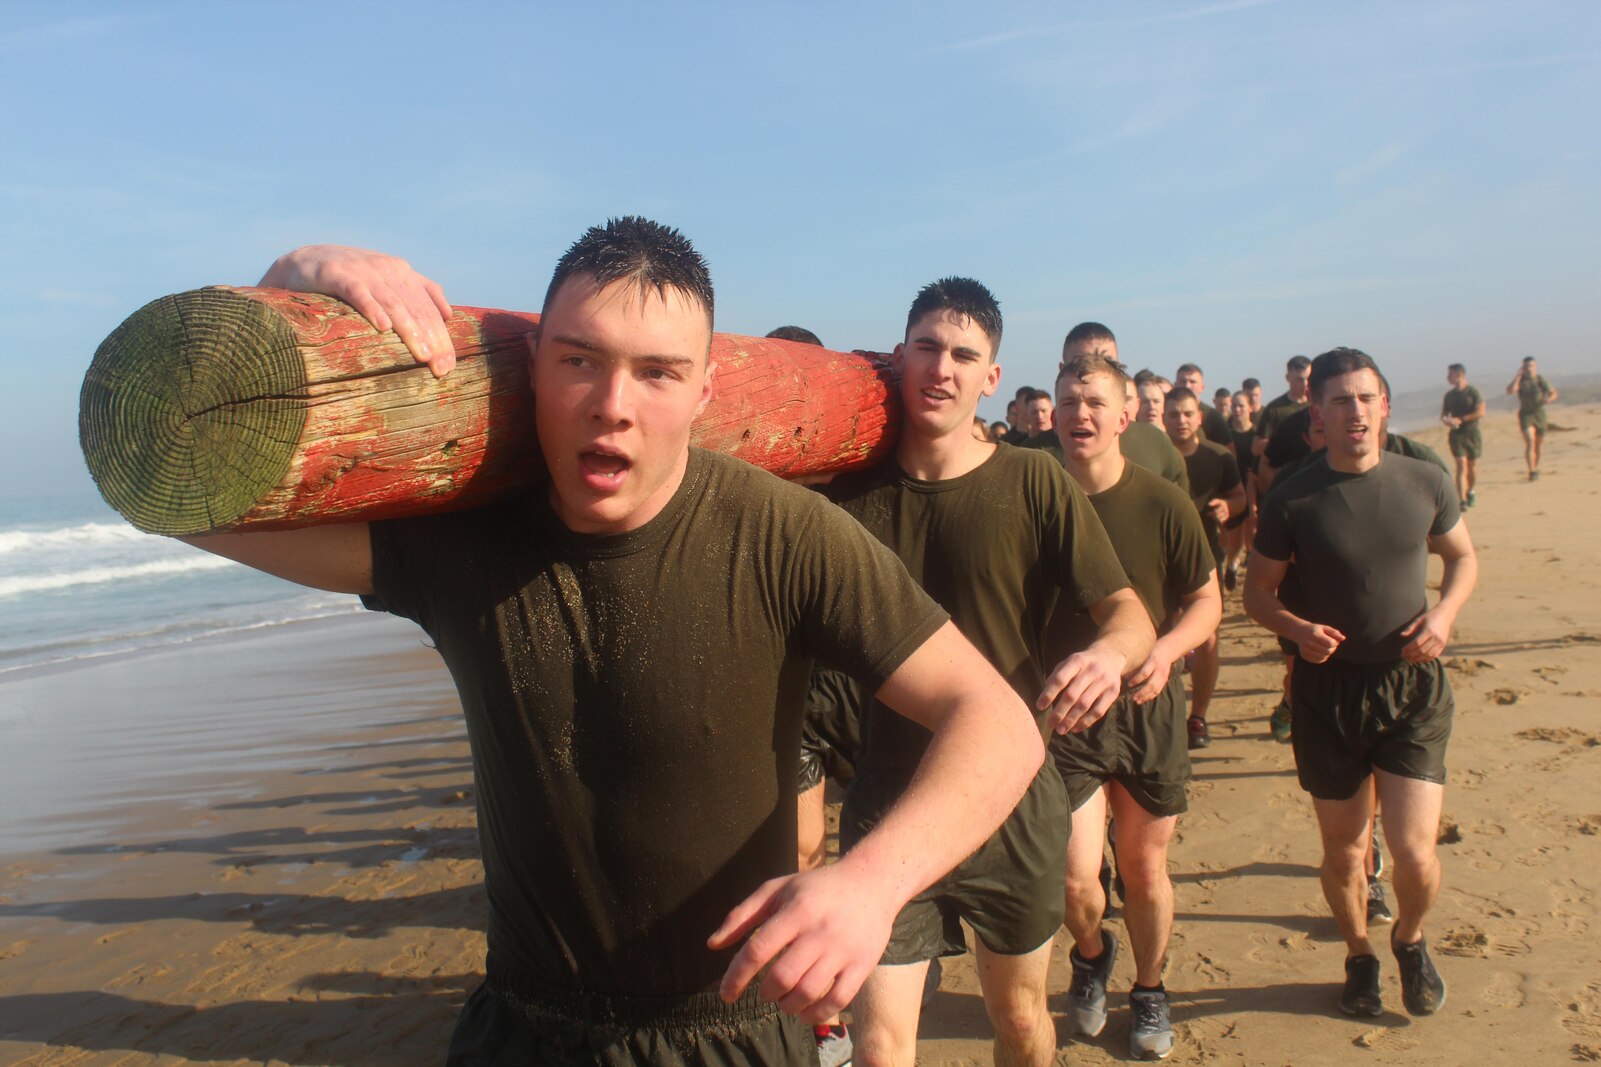 On 12 February, 2016 Marines in the Marine Corps Detachment participated in a log run on the beach in Monterey, Ca to build camaraderie and challenge themselves physically.  